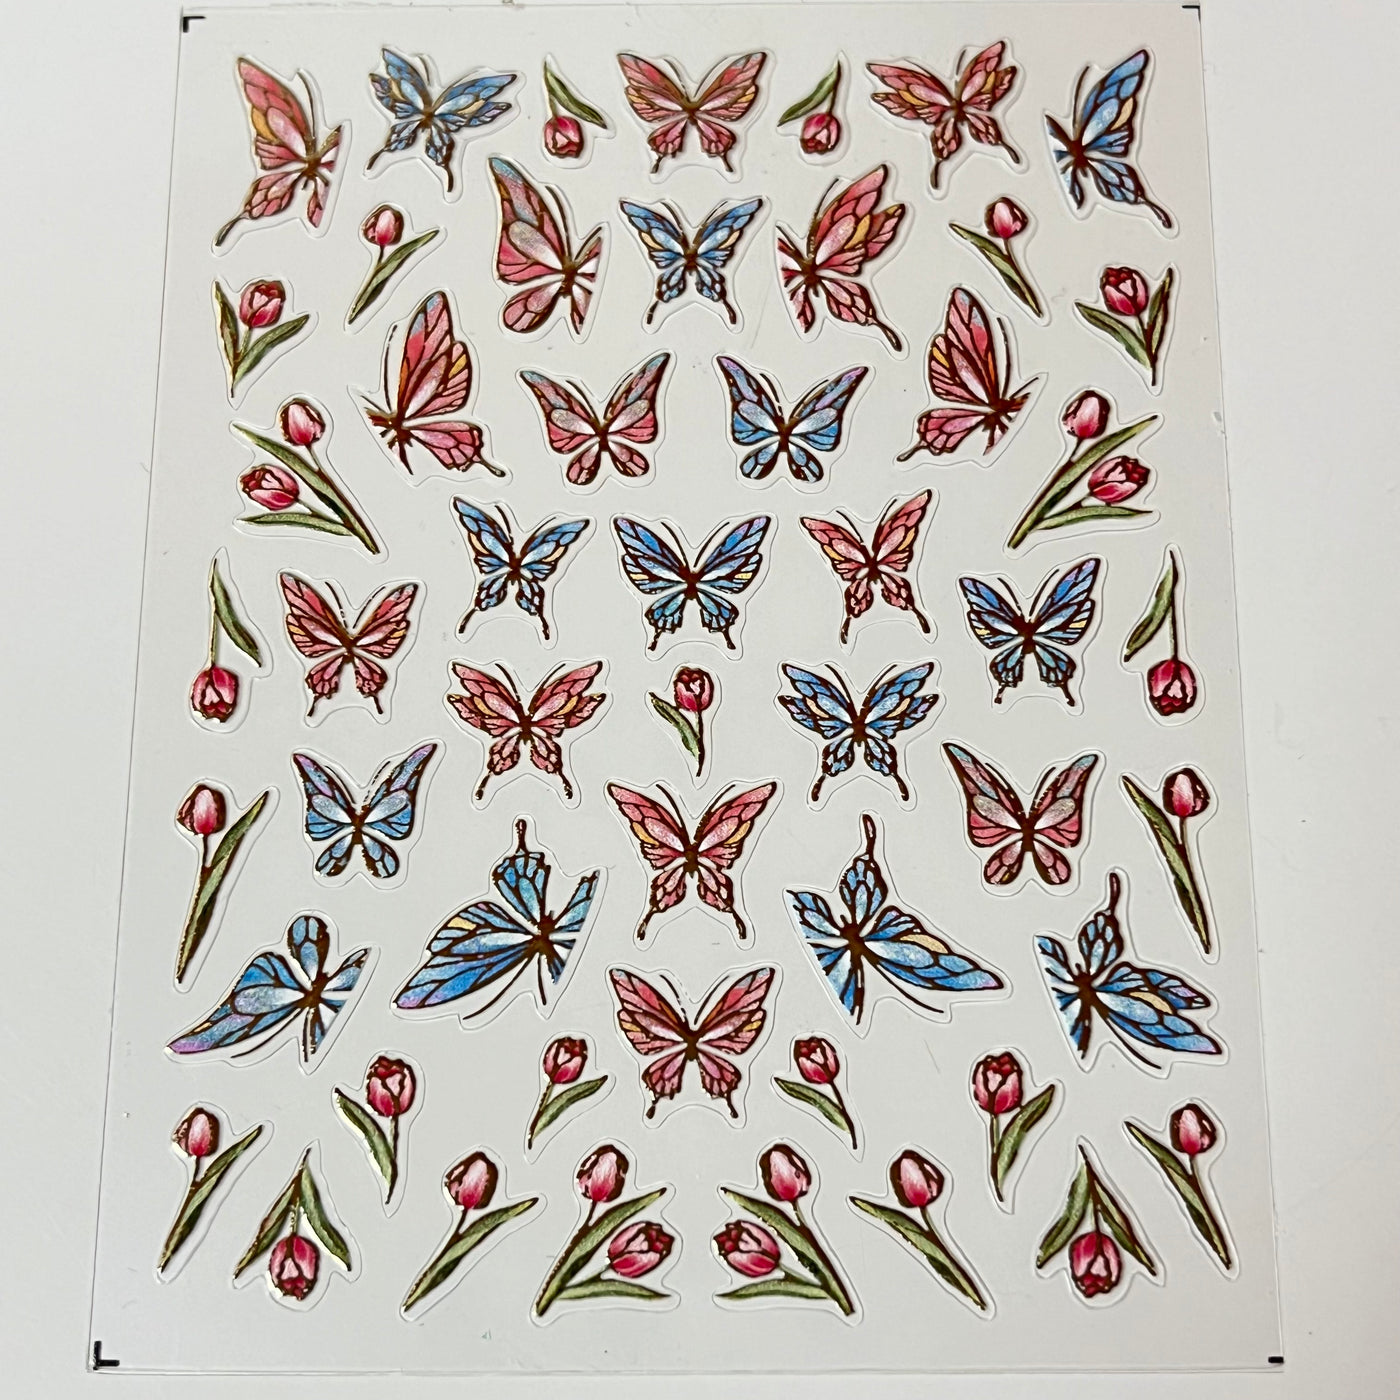 Glass Butterfly Stickers